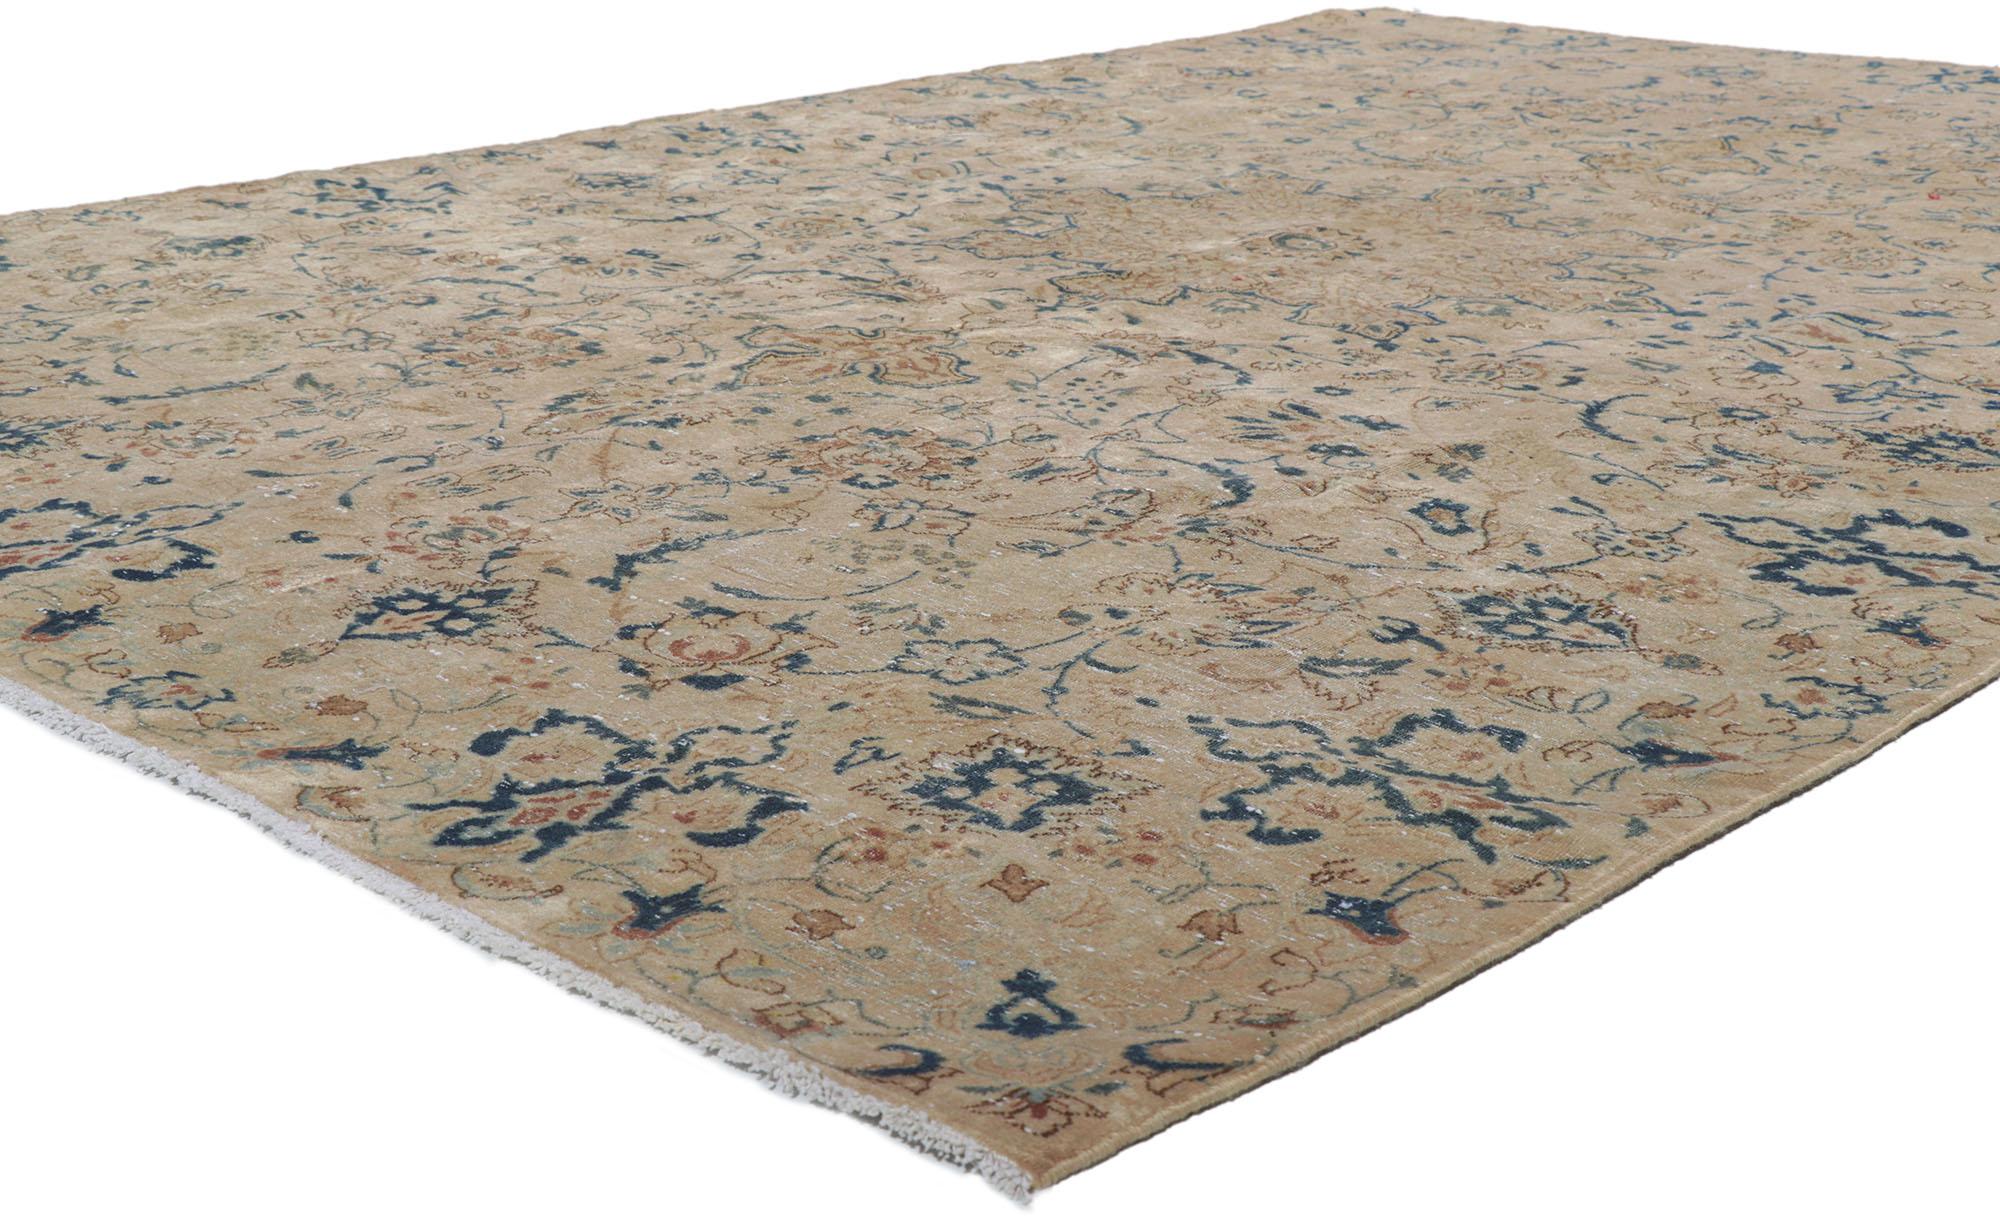 60996 Distressed Vintage Persian Isfahan Rug 06'10 x 09'10.

Rendered in variegated shades of tan, sand, ecru, cerulean, Aegean, camel, teal green, verdigris, latte, and brown with other accent colors.
Abrash. Distressed. Antique Wash. Desirable